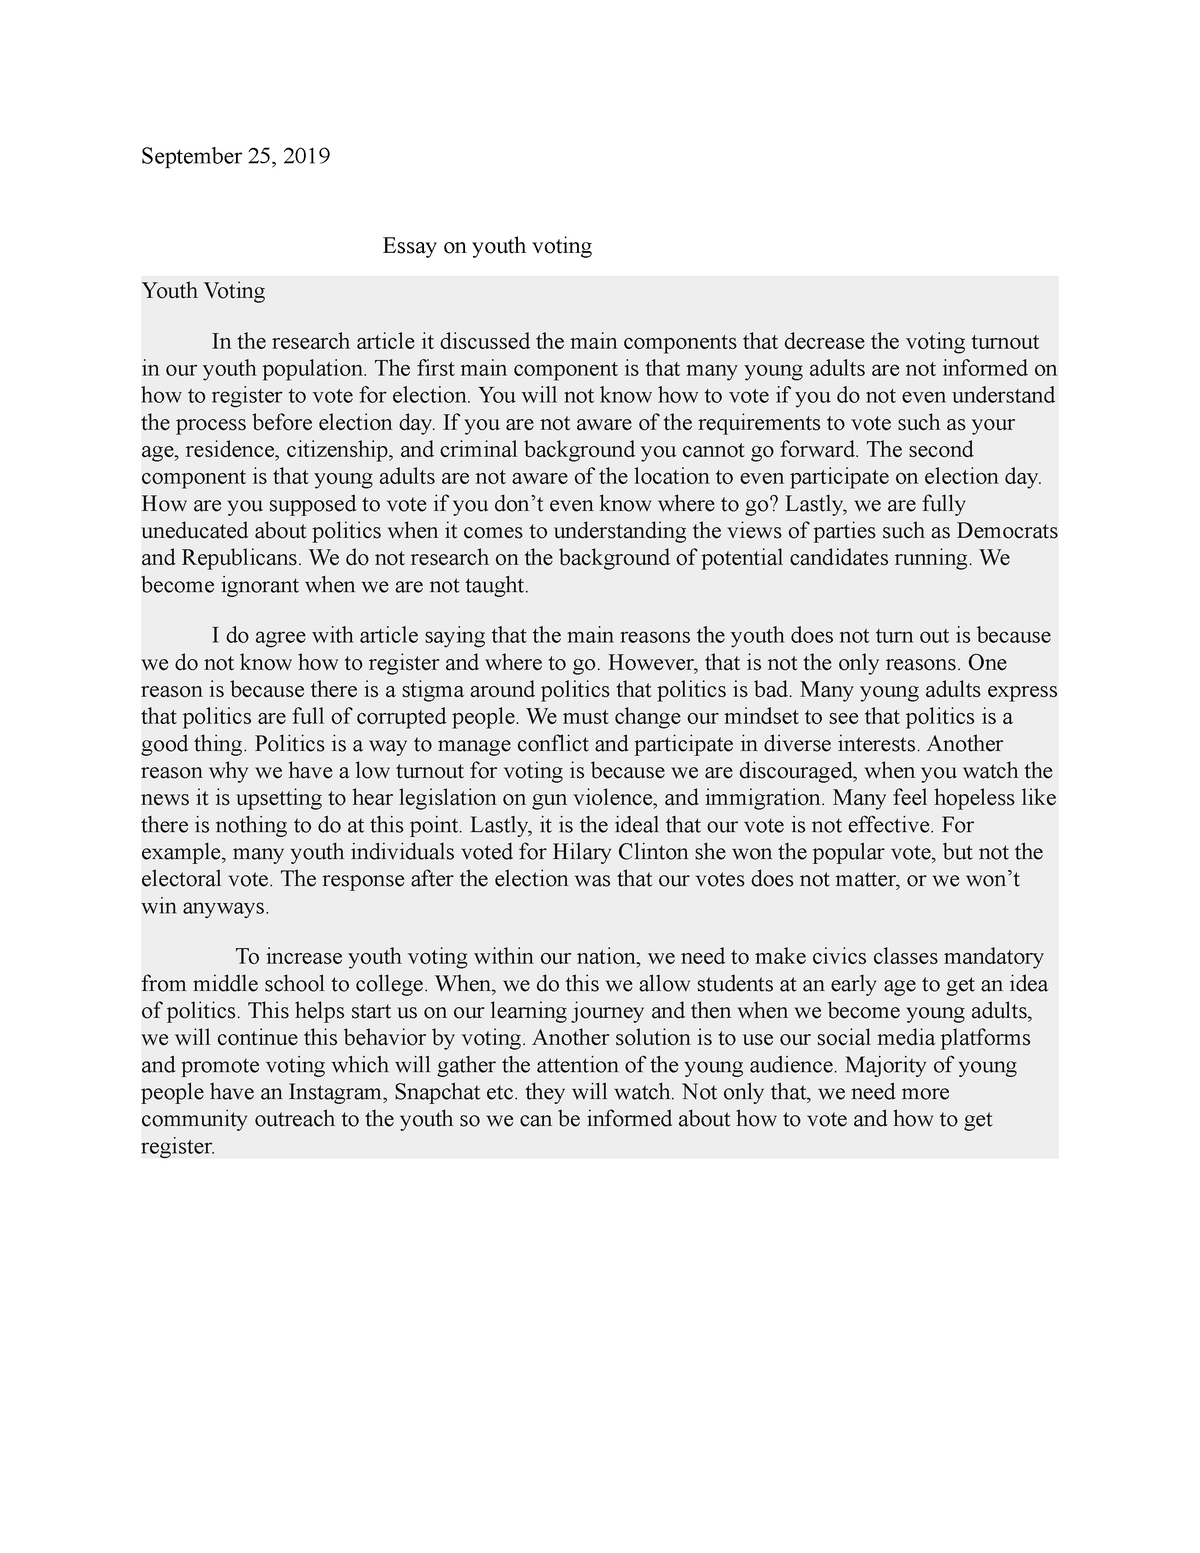 youth voting essay